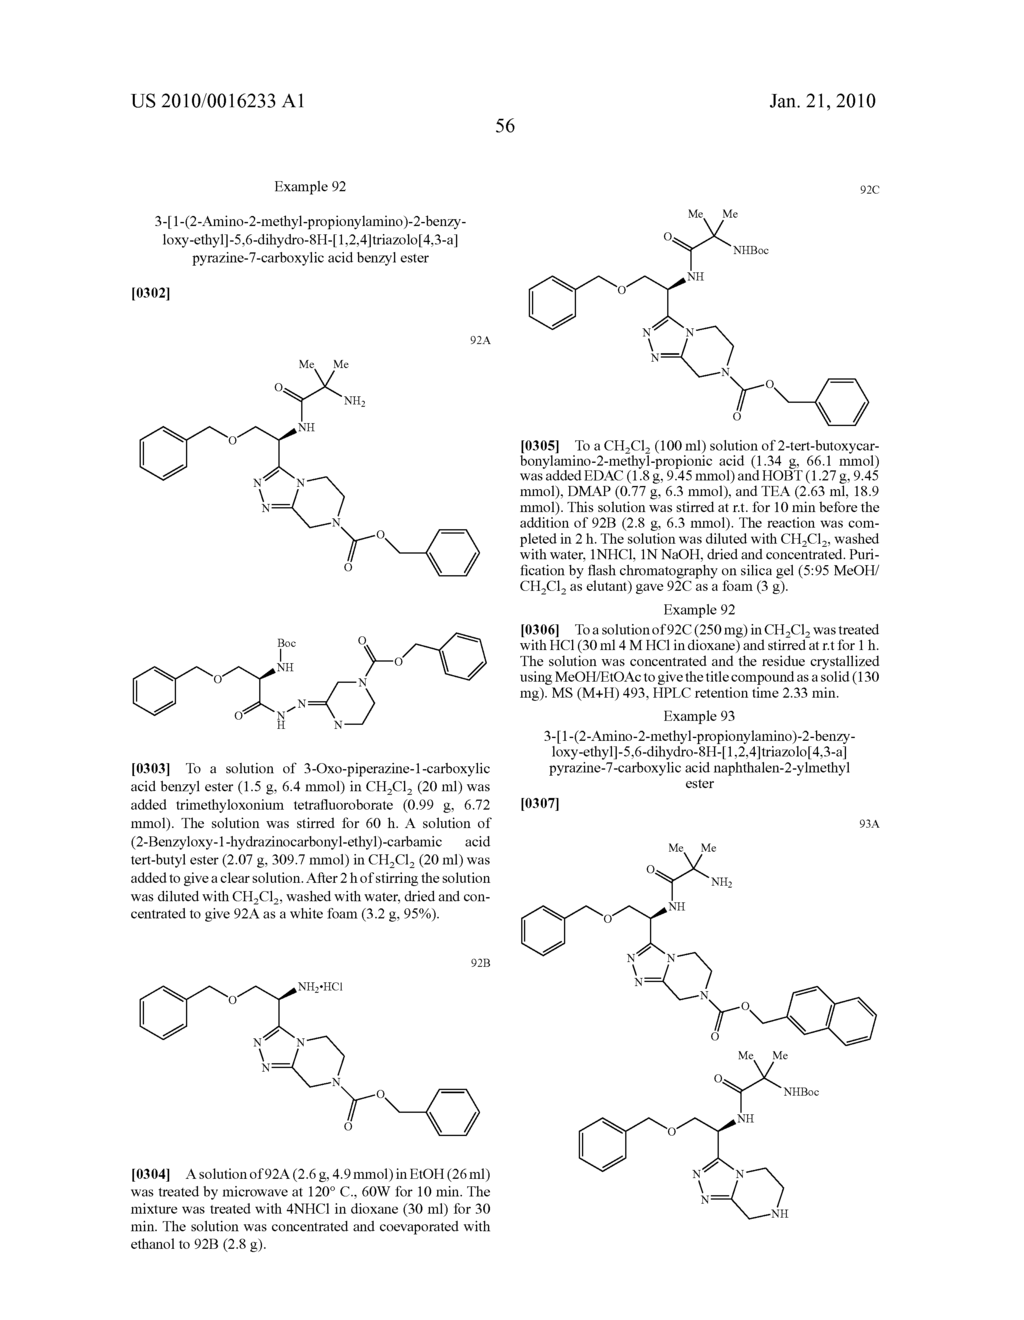 Heterocyclic Aromatic Compounds Useful As Growth Hormone Secretagogues - diagram, schematic, and image 57